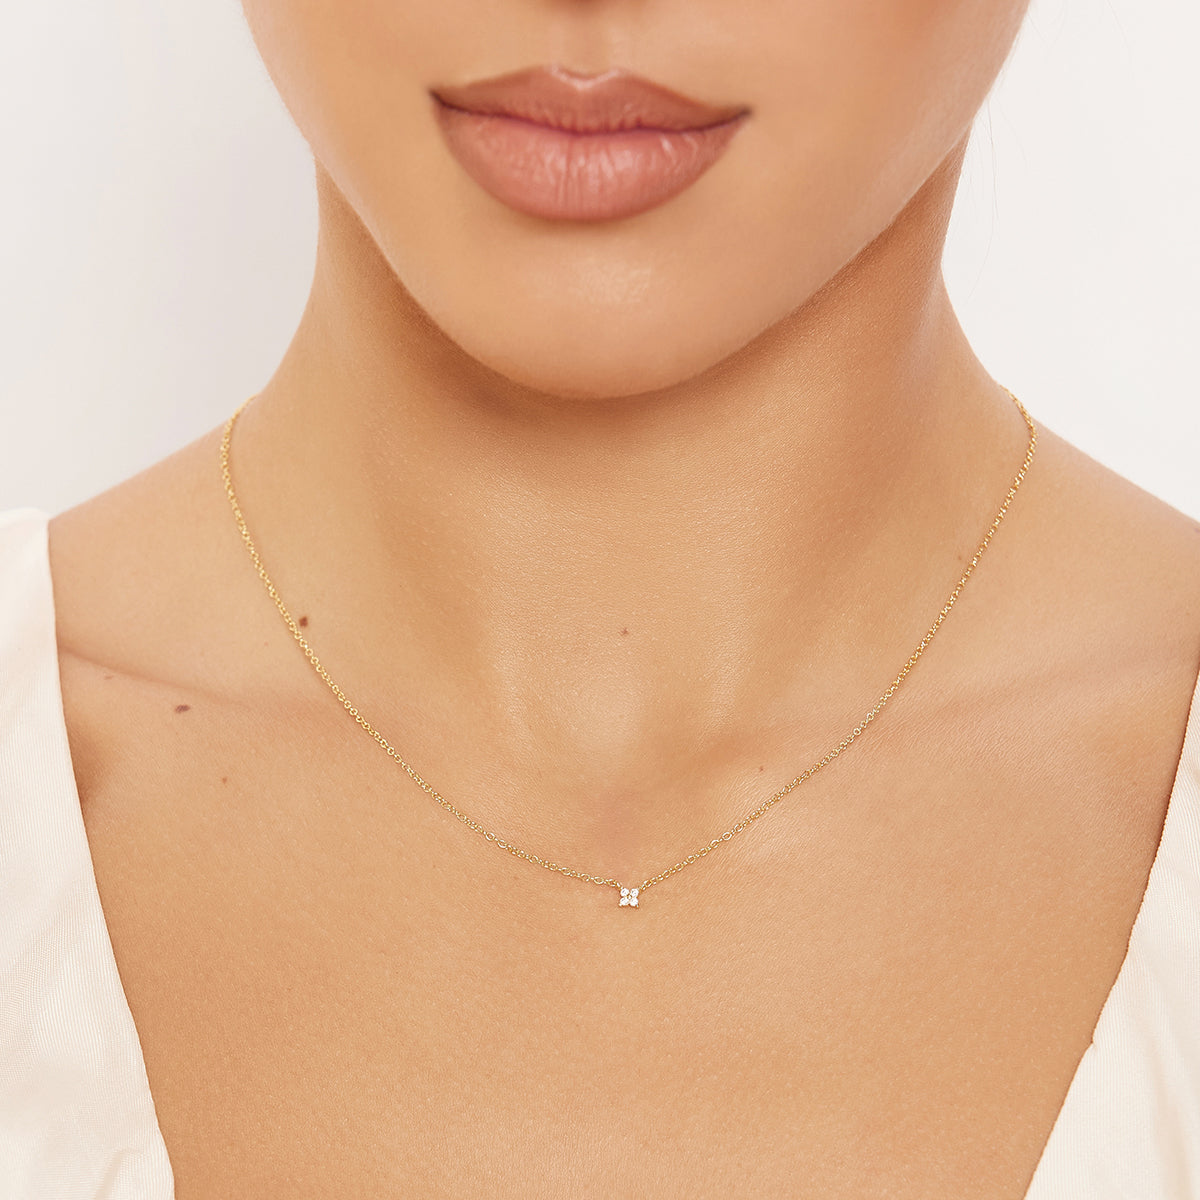 Iris clover white zirconia necklace plated in 14k gold